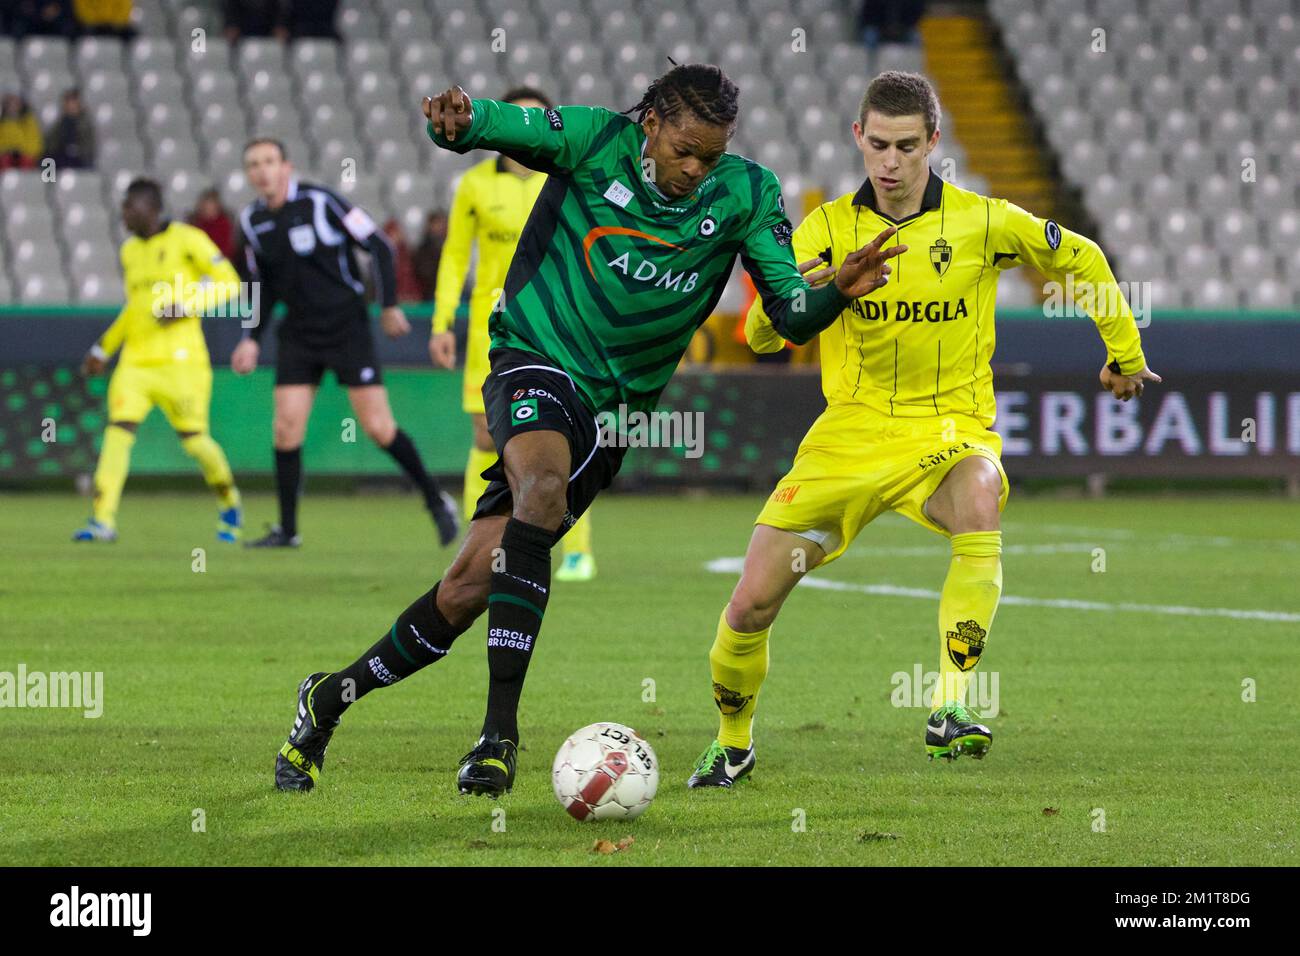 20131123 - BRUGGE, BELGIUM: Cercle's Michael Uchebo and Lierse's Thomas Wils fight for the ball during the Jupiler Pro League match between Cercle Brugge and Lierse, in Brugge, Saturday 23 November 2013, on day 16 of the Belgian soccer championship. BELGA PHOTO KURT DESPLENTER Stock Photo